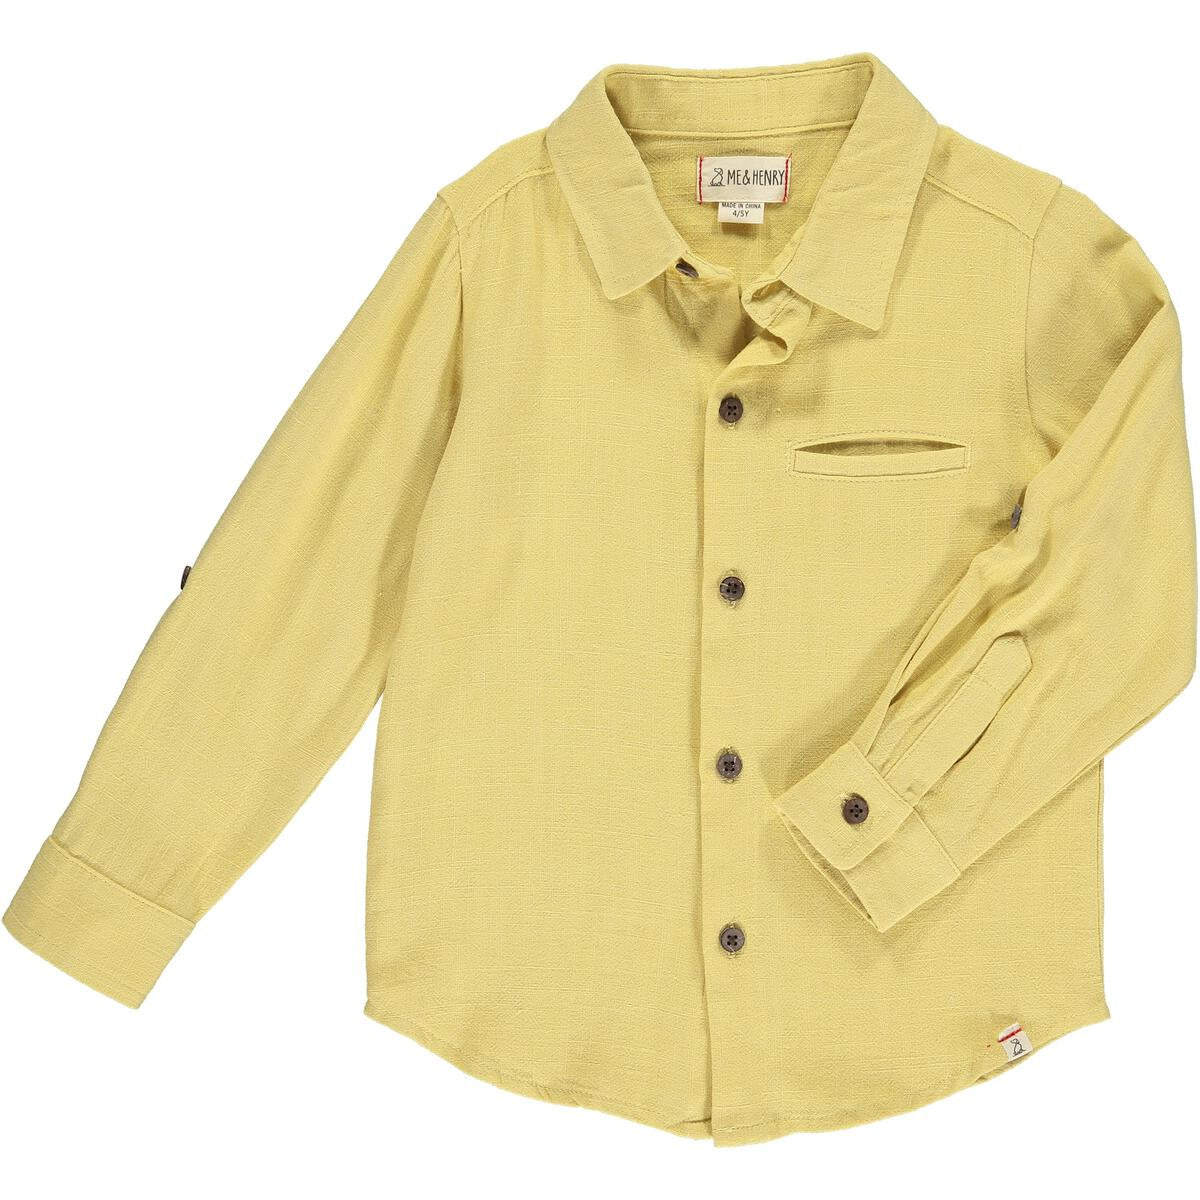 Atwood Woven shirt- Gold